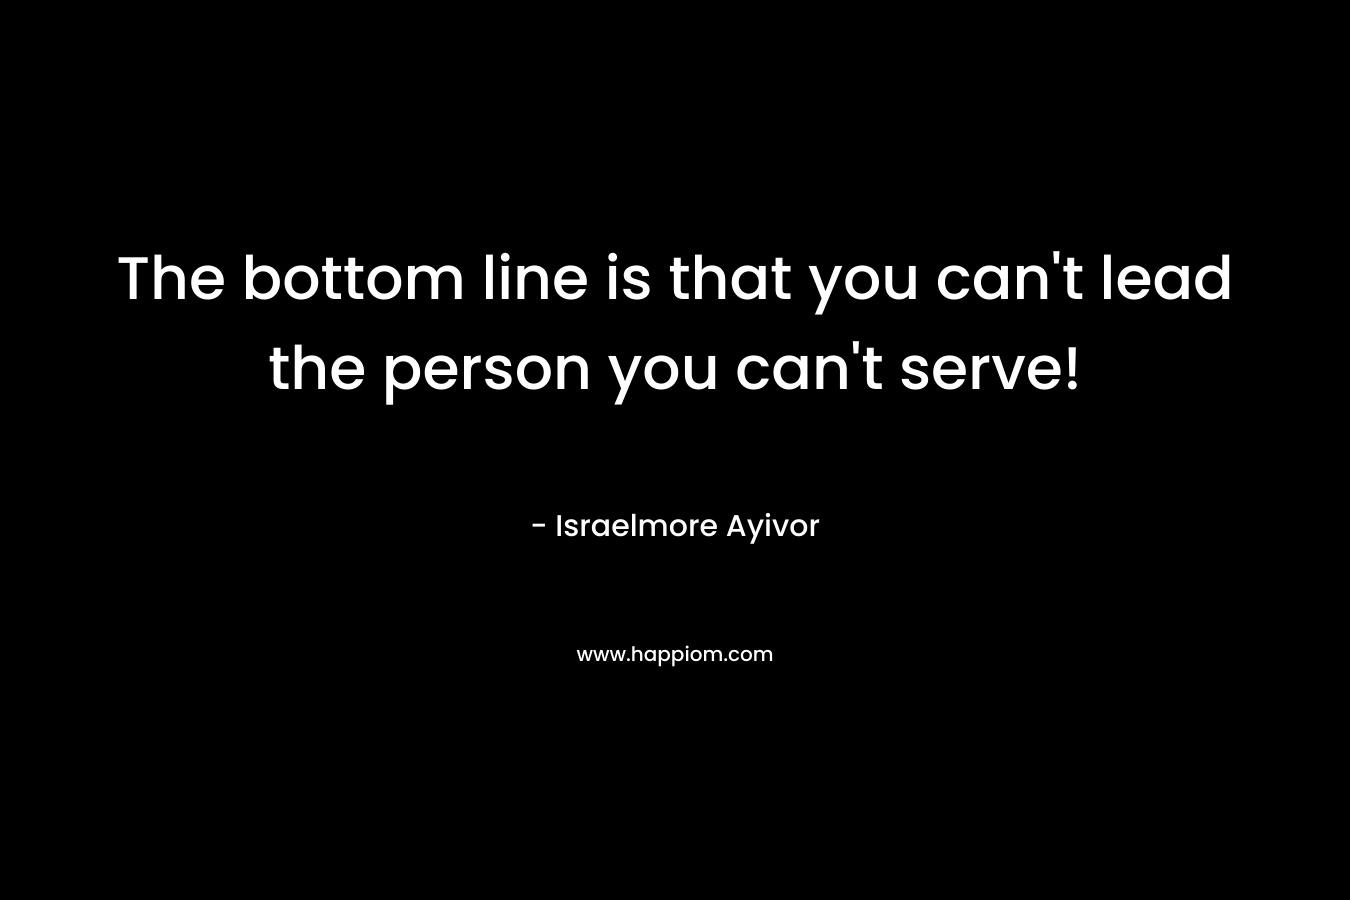 The bottom line is that you can't lead the person you can't serve!